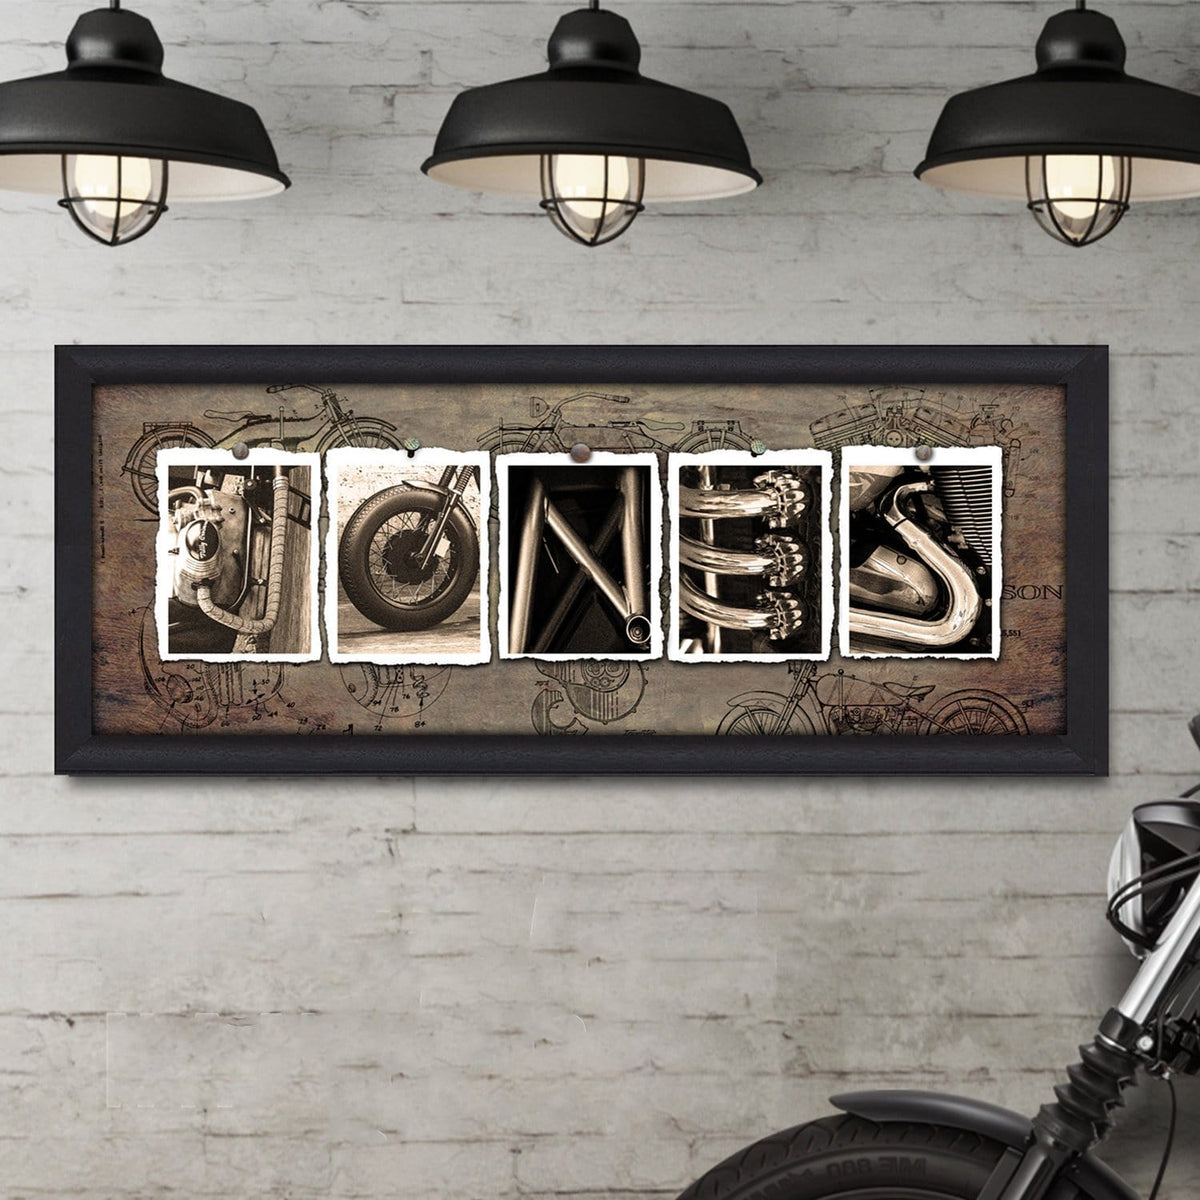 Personalized motorcycle art framed canvas using photographs of bike parts to spell your name - Lifestyle Decor